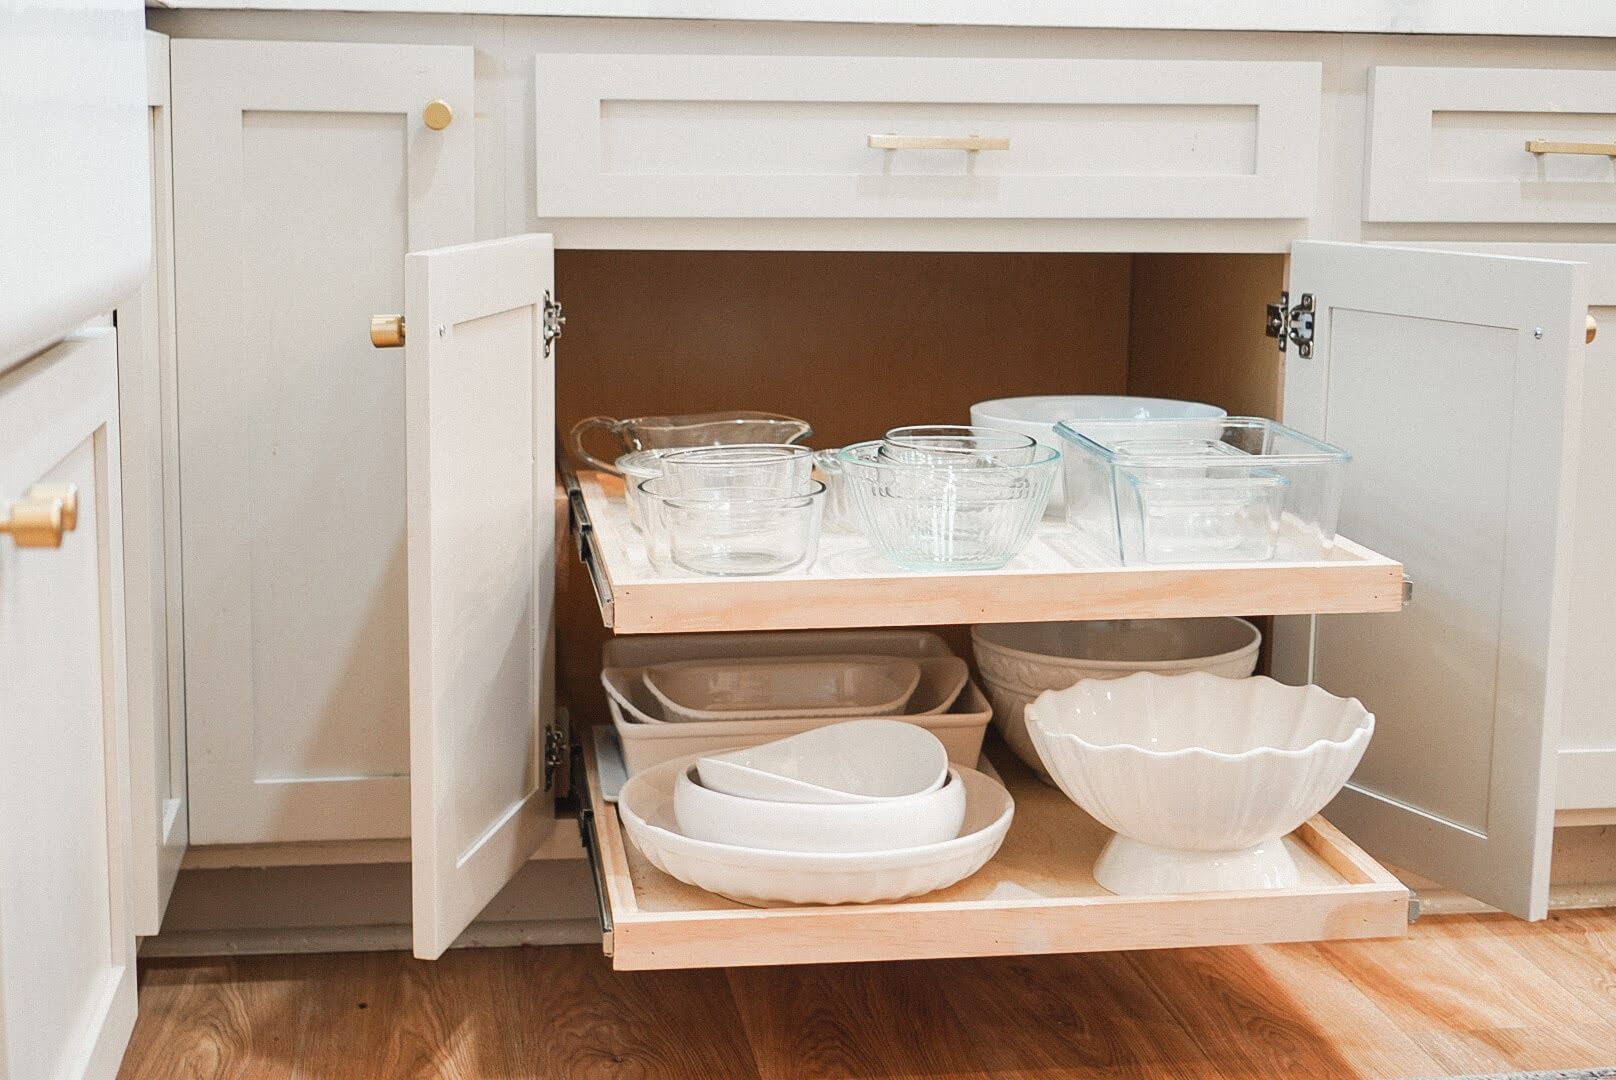 DIY pull-out kitchen shelving.